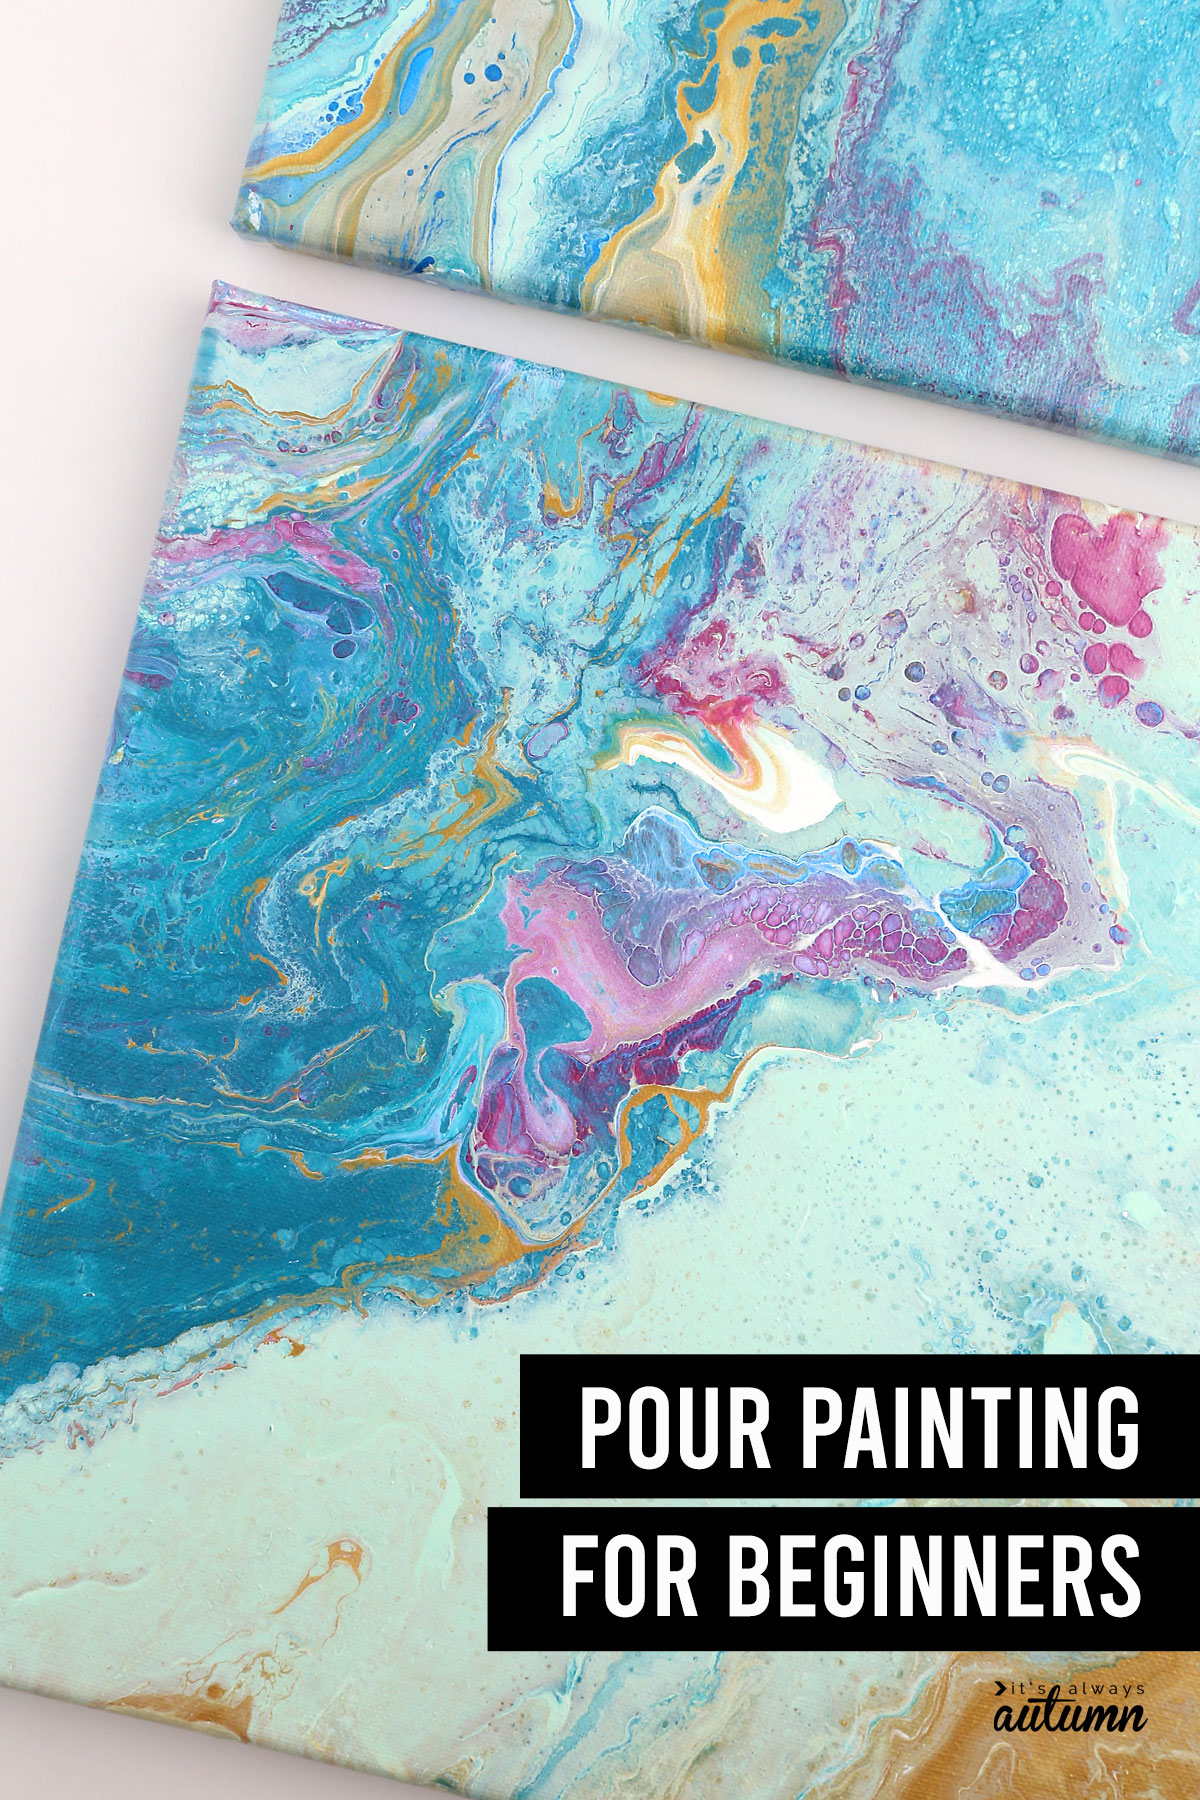 Acrylic paint pouring with text: pour painting for beginners